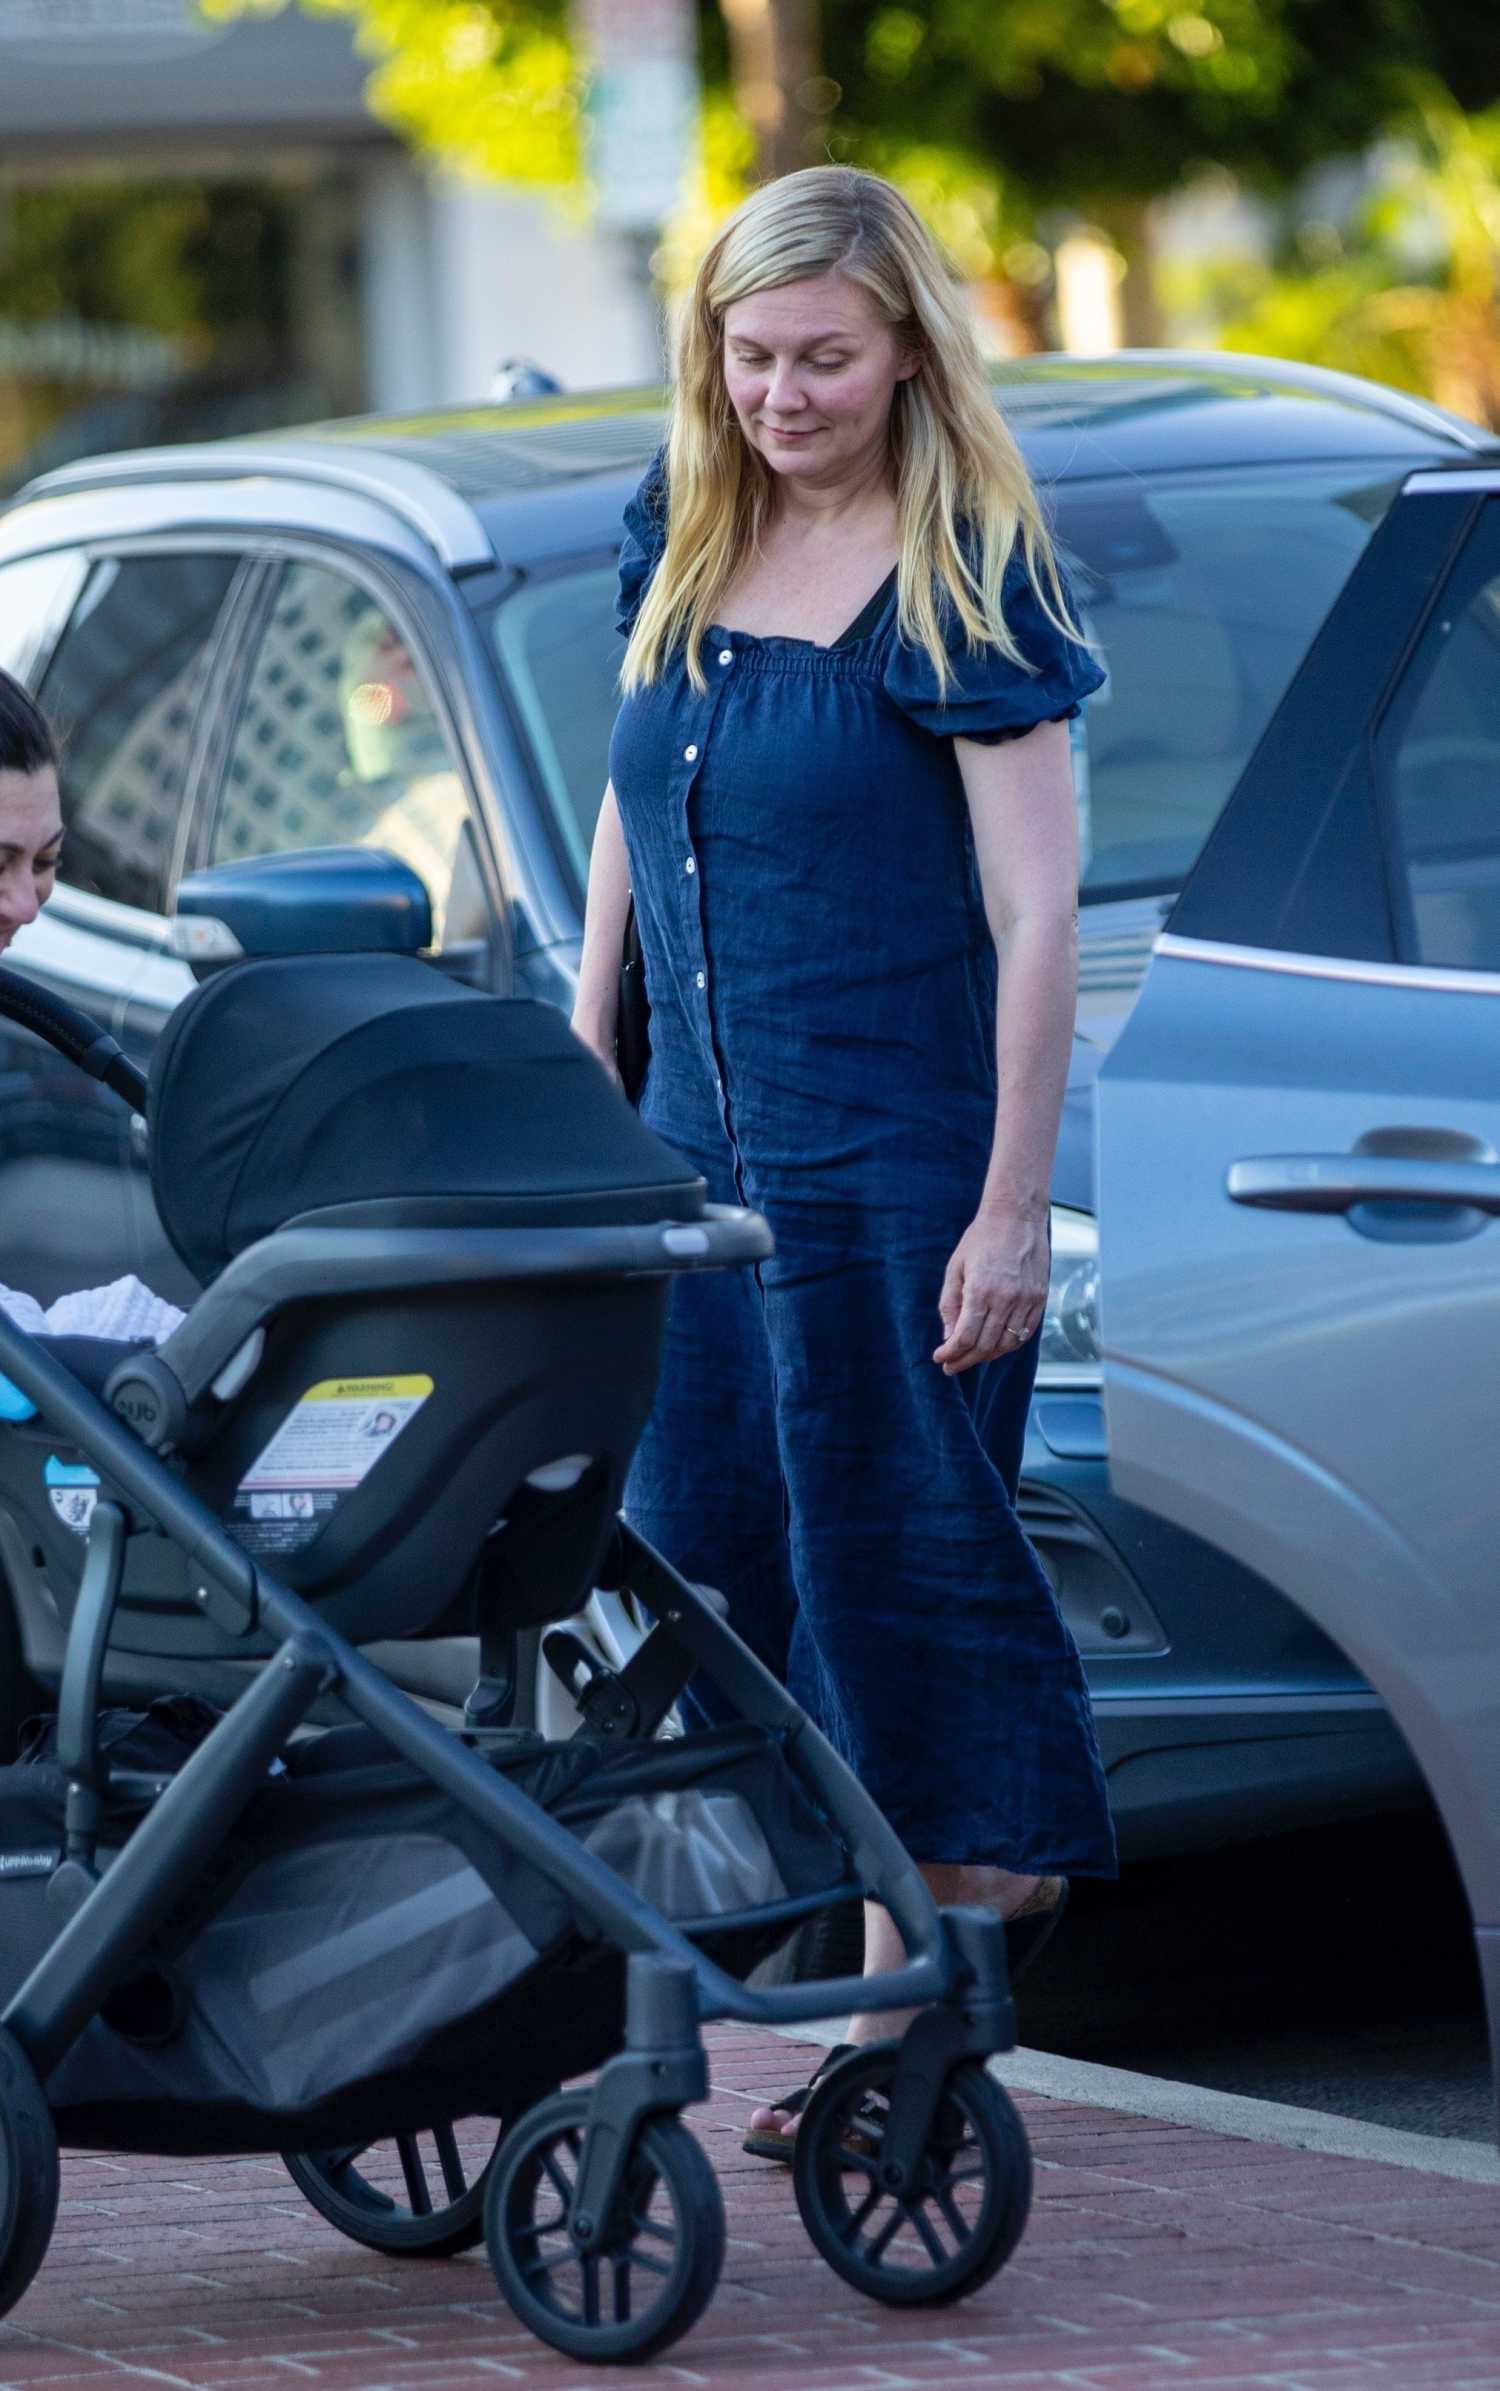 Kirsten Dunst in a Blue Dress Was Spotted Out with Her Two Kids in